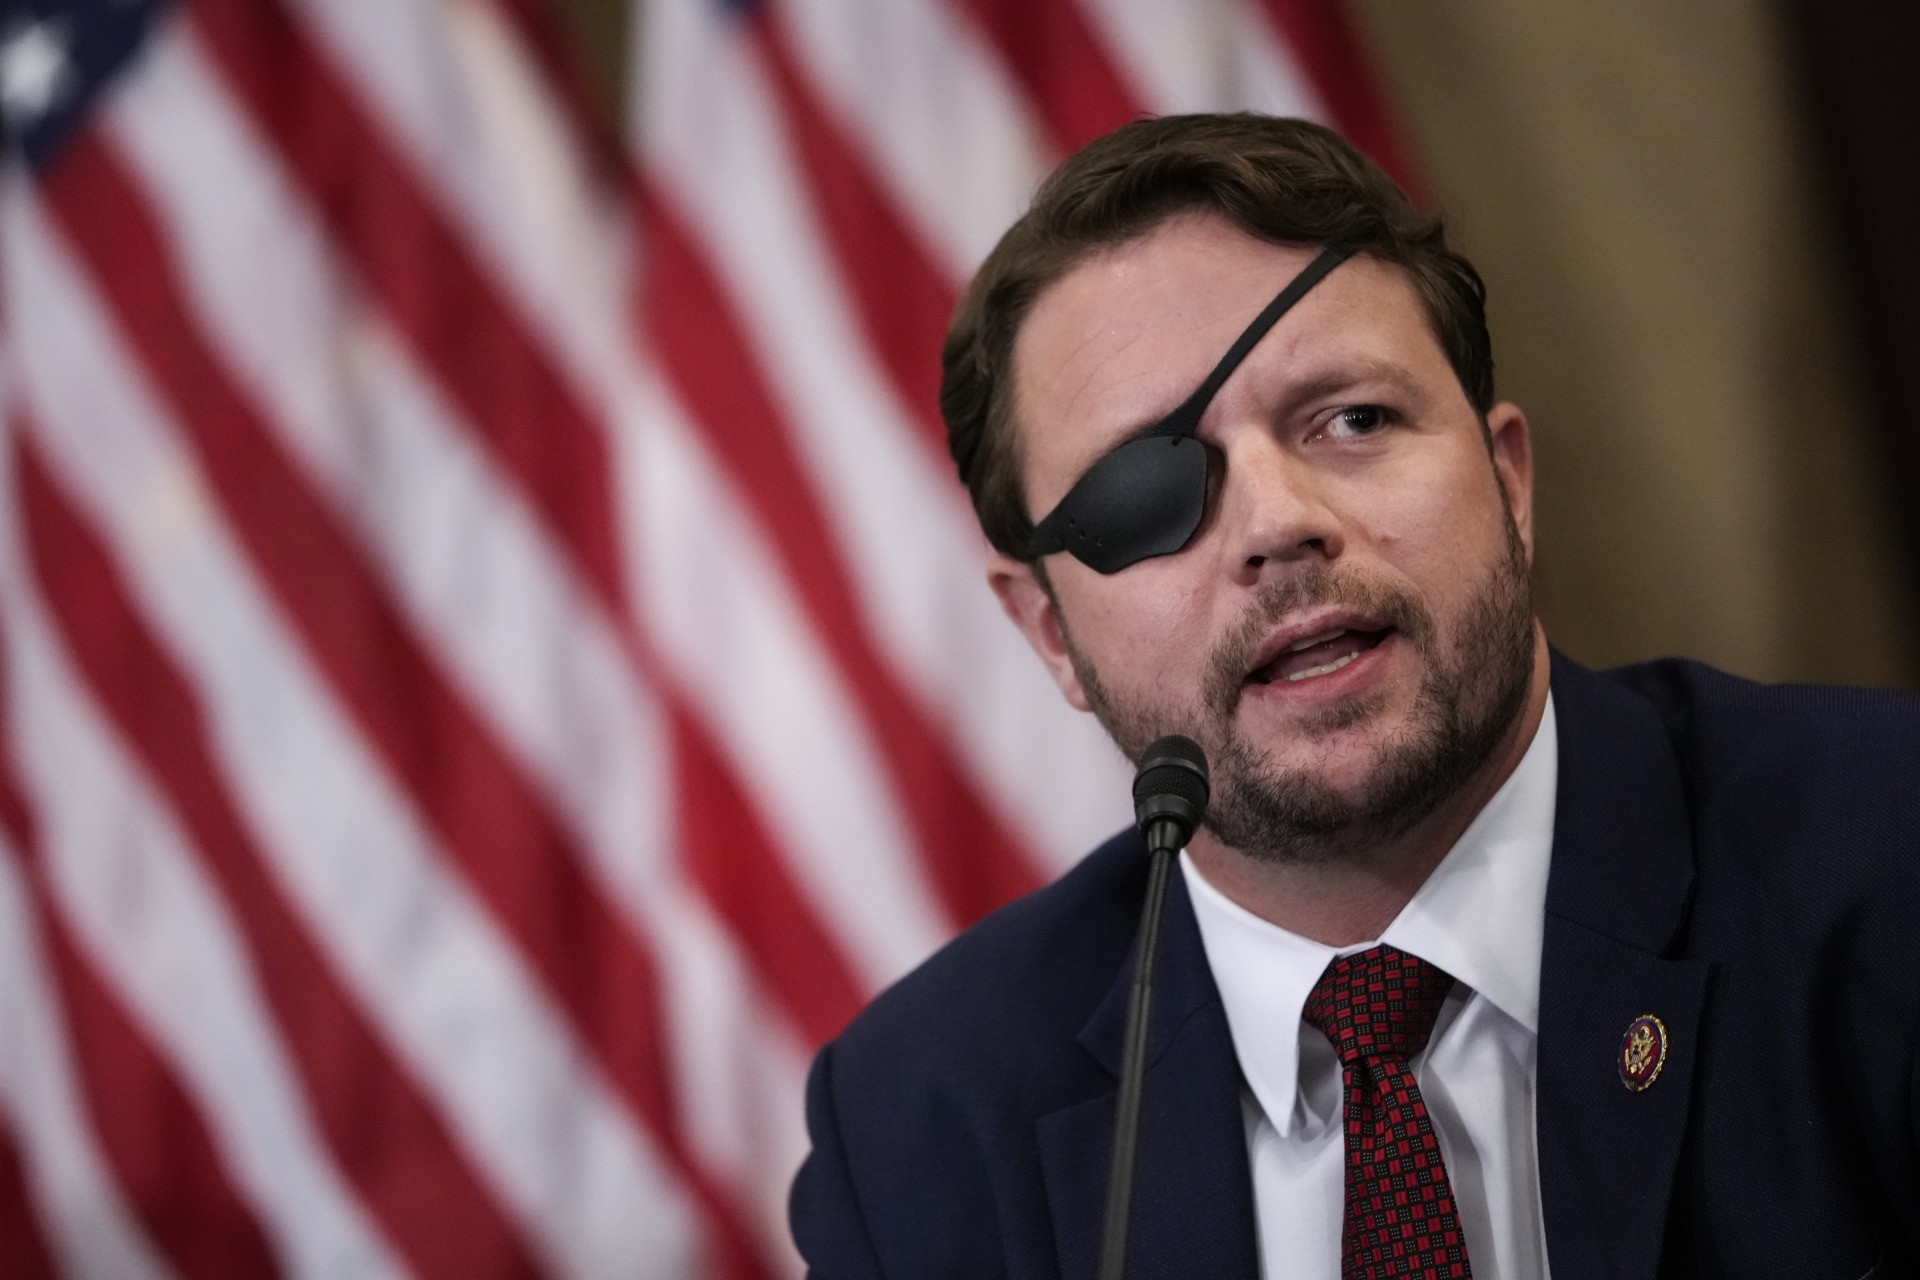 WASHINGTON, DC - AUGUST 30: Rep. Dan Crenshaw (R-TX) speaks about the American military withdrawal in Afghanistan, during a meeting with House Republicans, including those who served in the military, on August 30, 2021 in Washington, DC. House Minority Leader Kevin McCarthy called on Speaker of the House Nancy Pelosi to bring Congress back into session this week to address remaining issues in Afghanistan. (Photo by Drew Angerer/Getty Images)